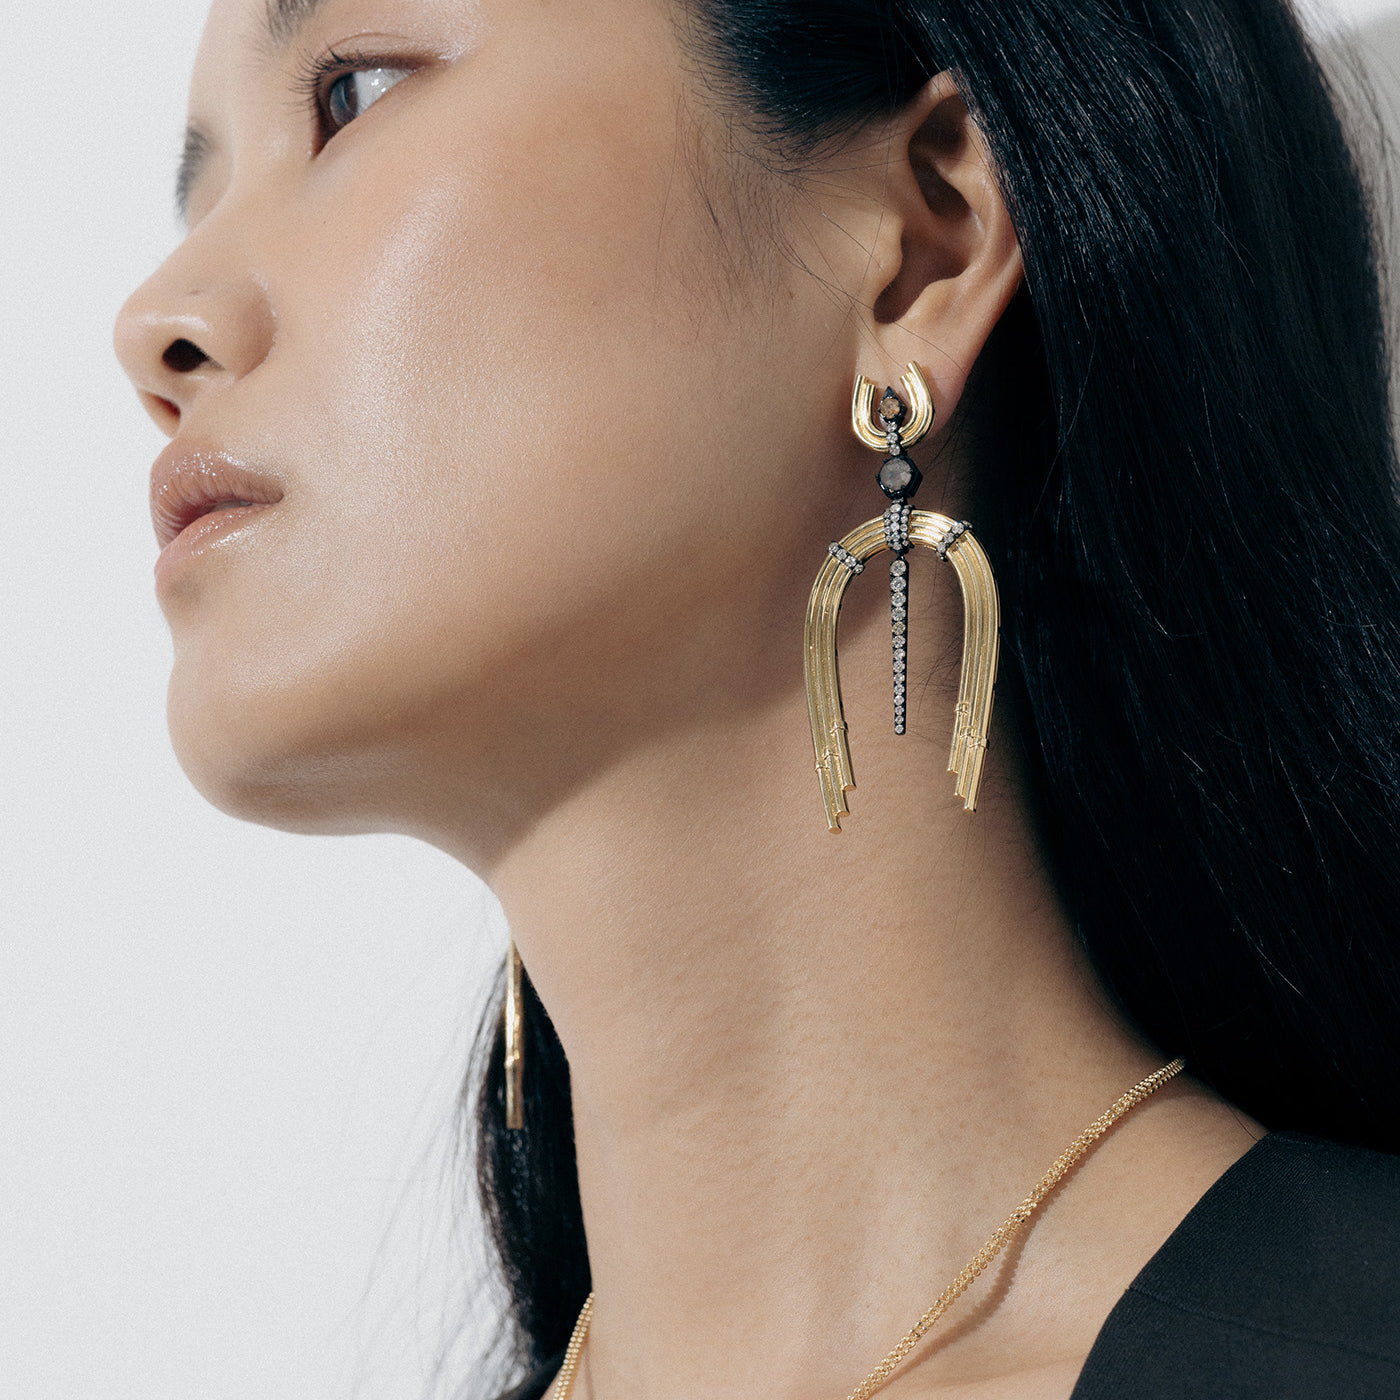 Yellow Gold Earrings with Diamond-lined, Rhodium plated features and horseshoe shapes - Model shot